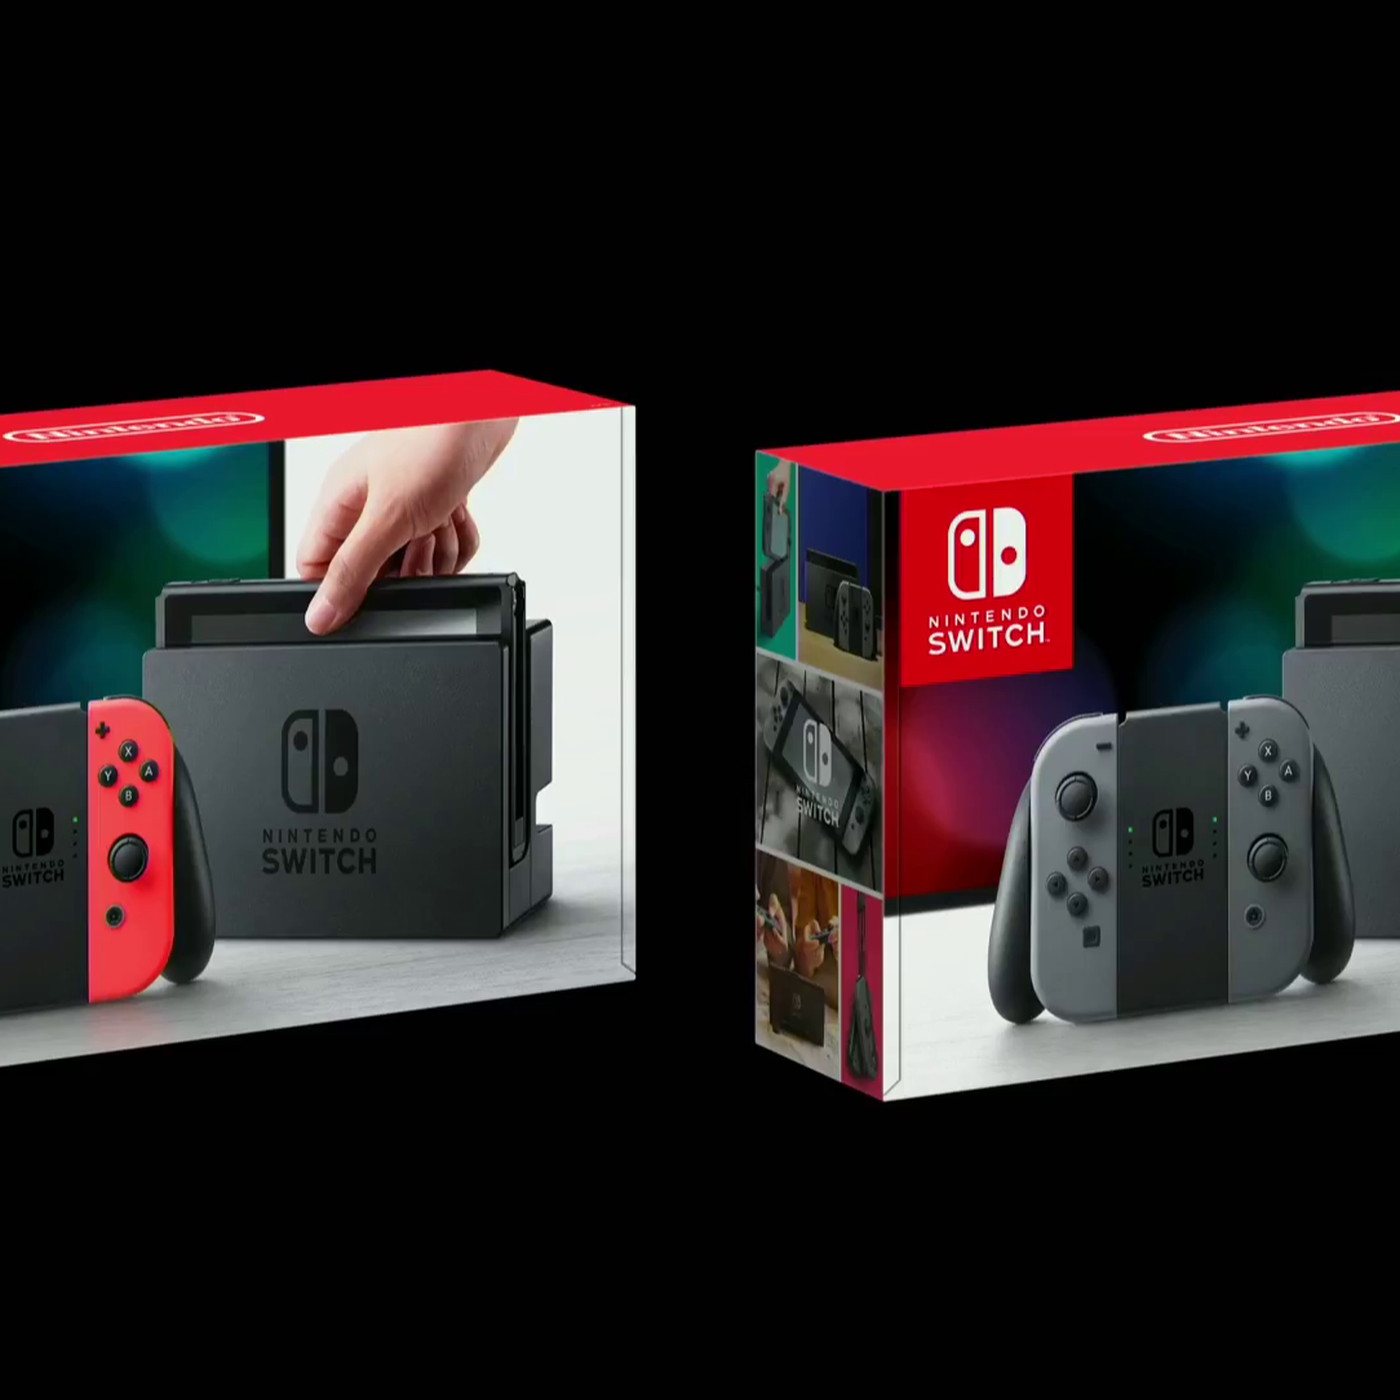 75 Switch Pre Order Bonus At Gamestop Is Perfect For Trading In